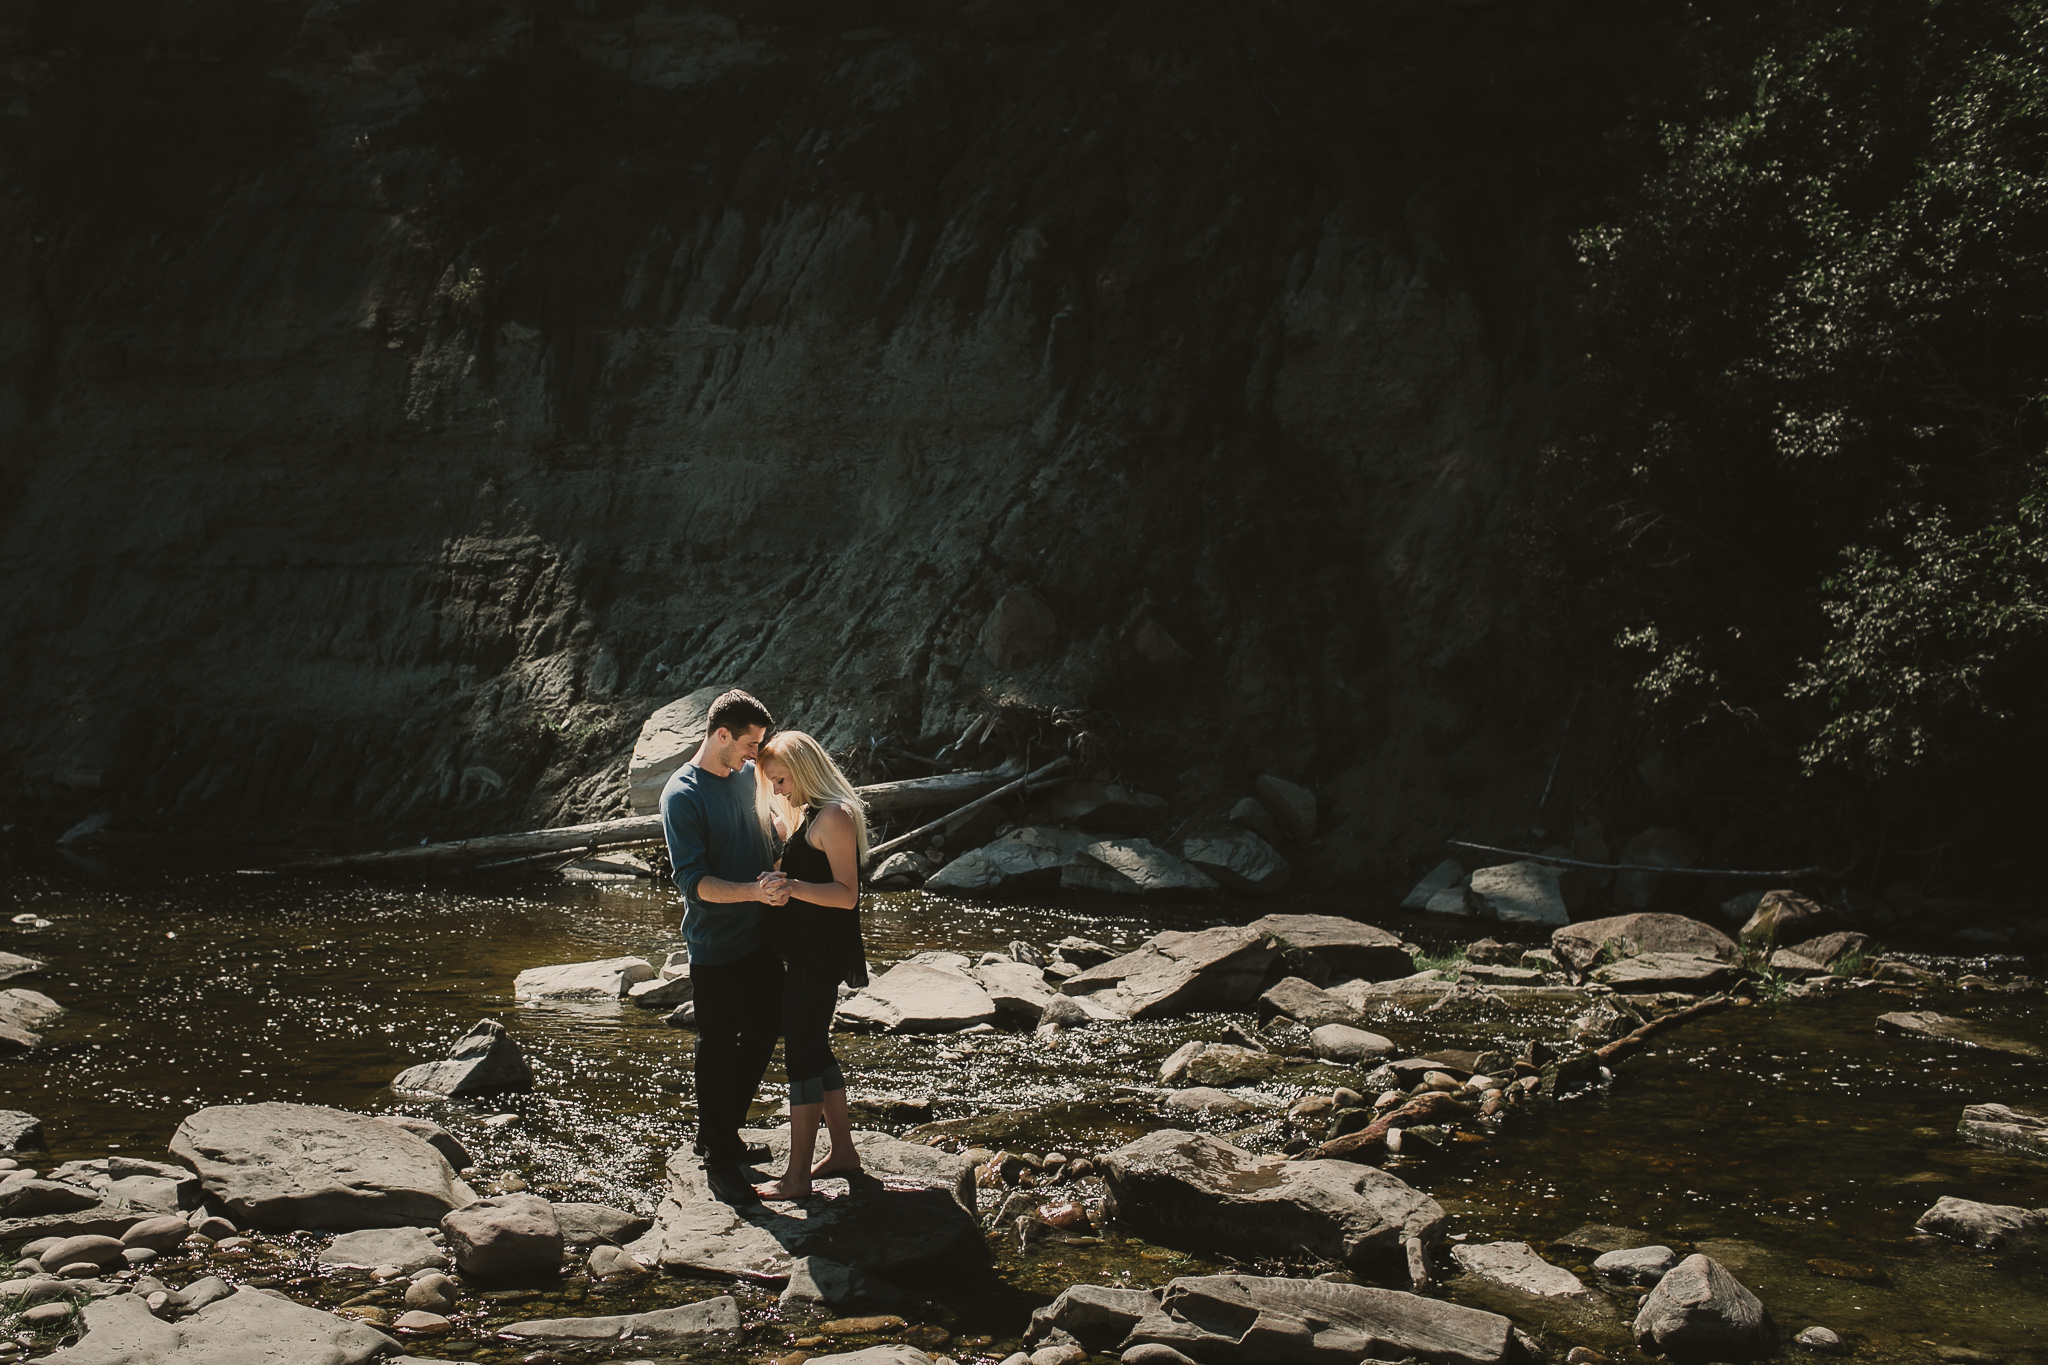 man and woan embrace on a rock in the river